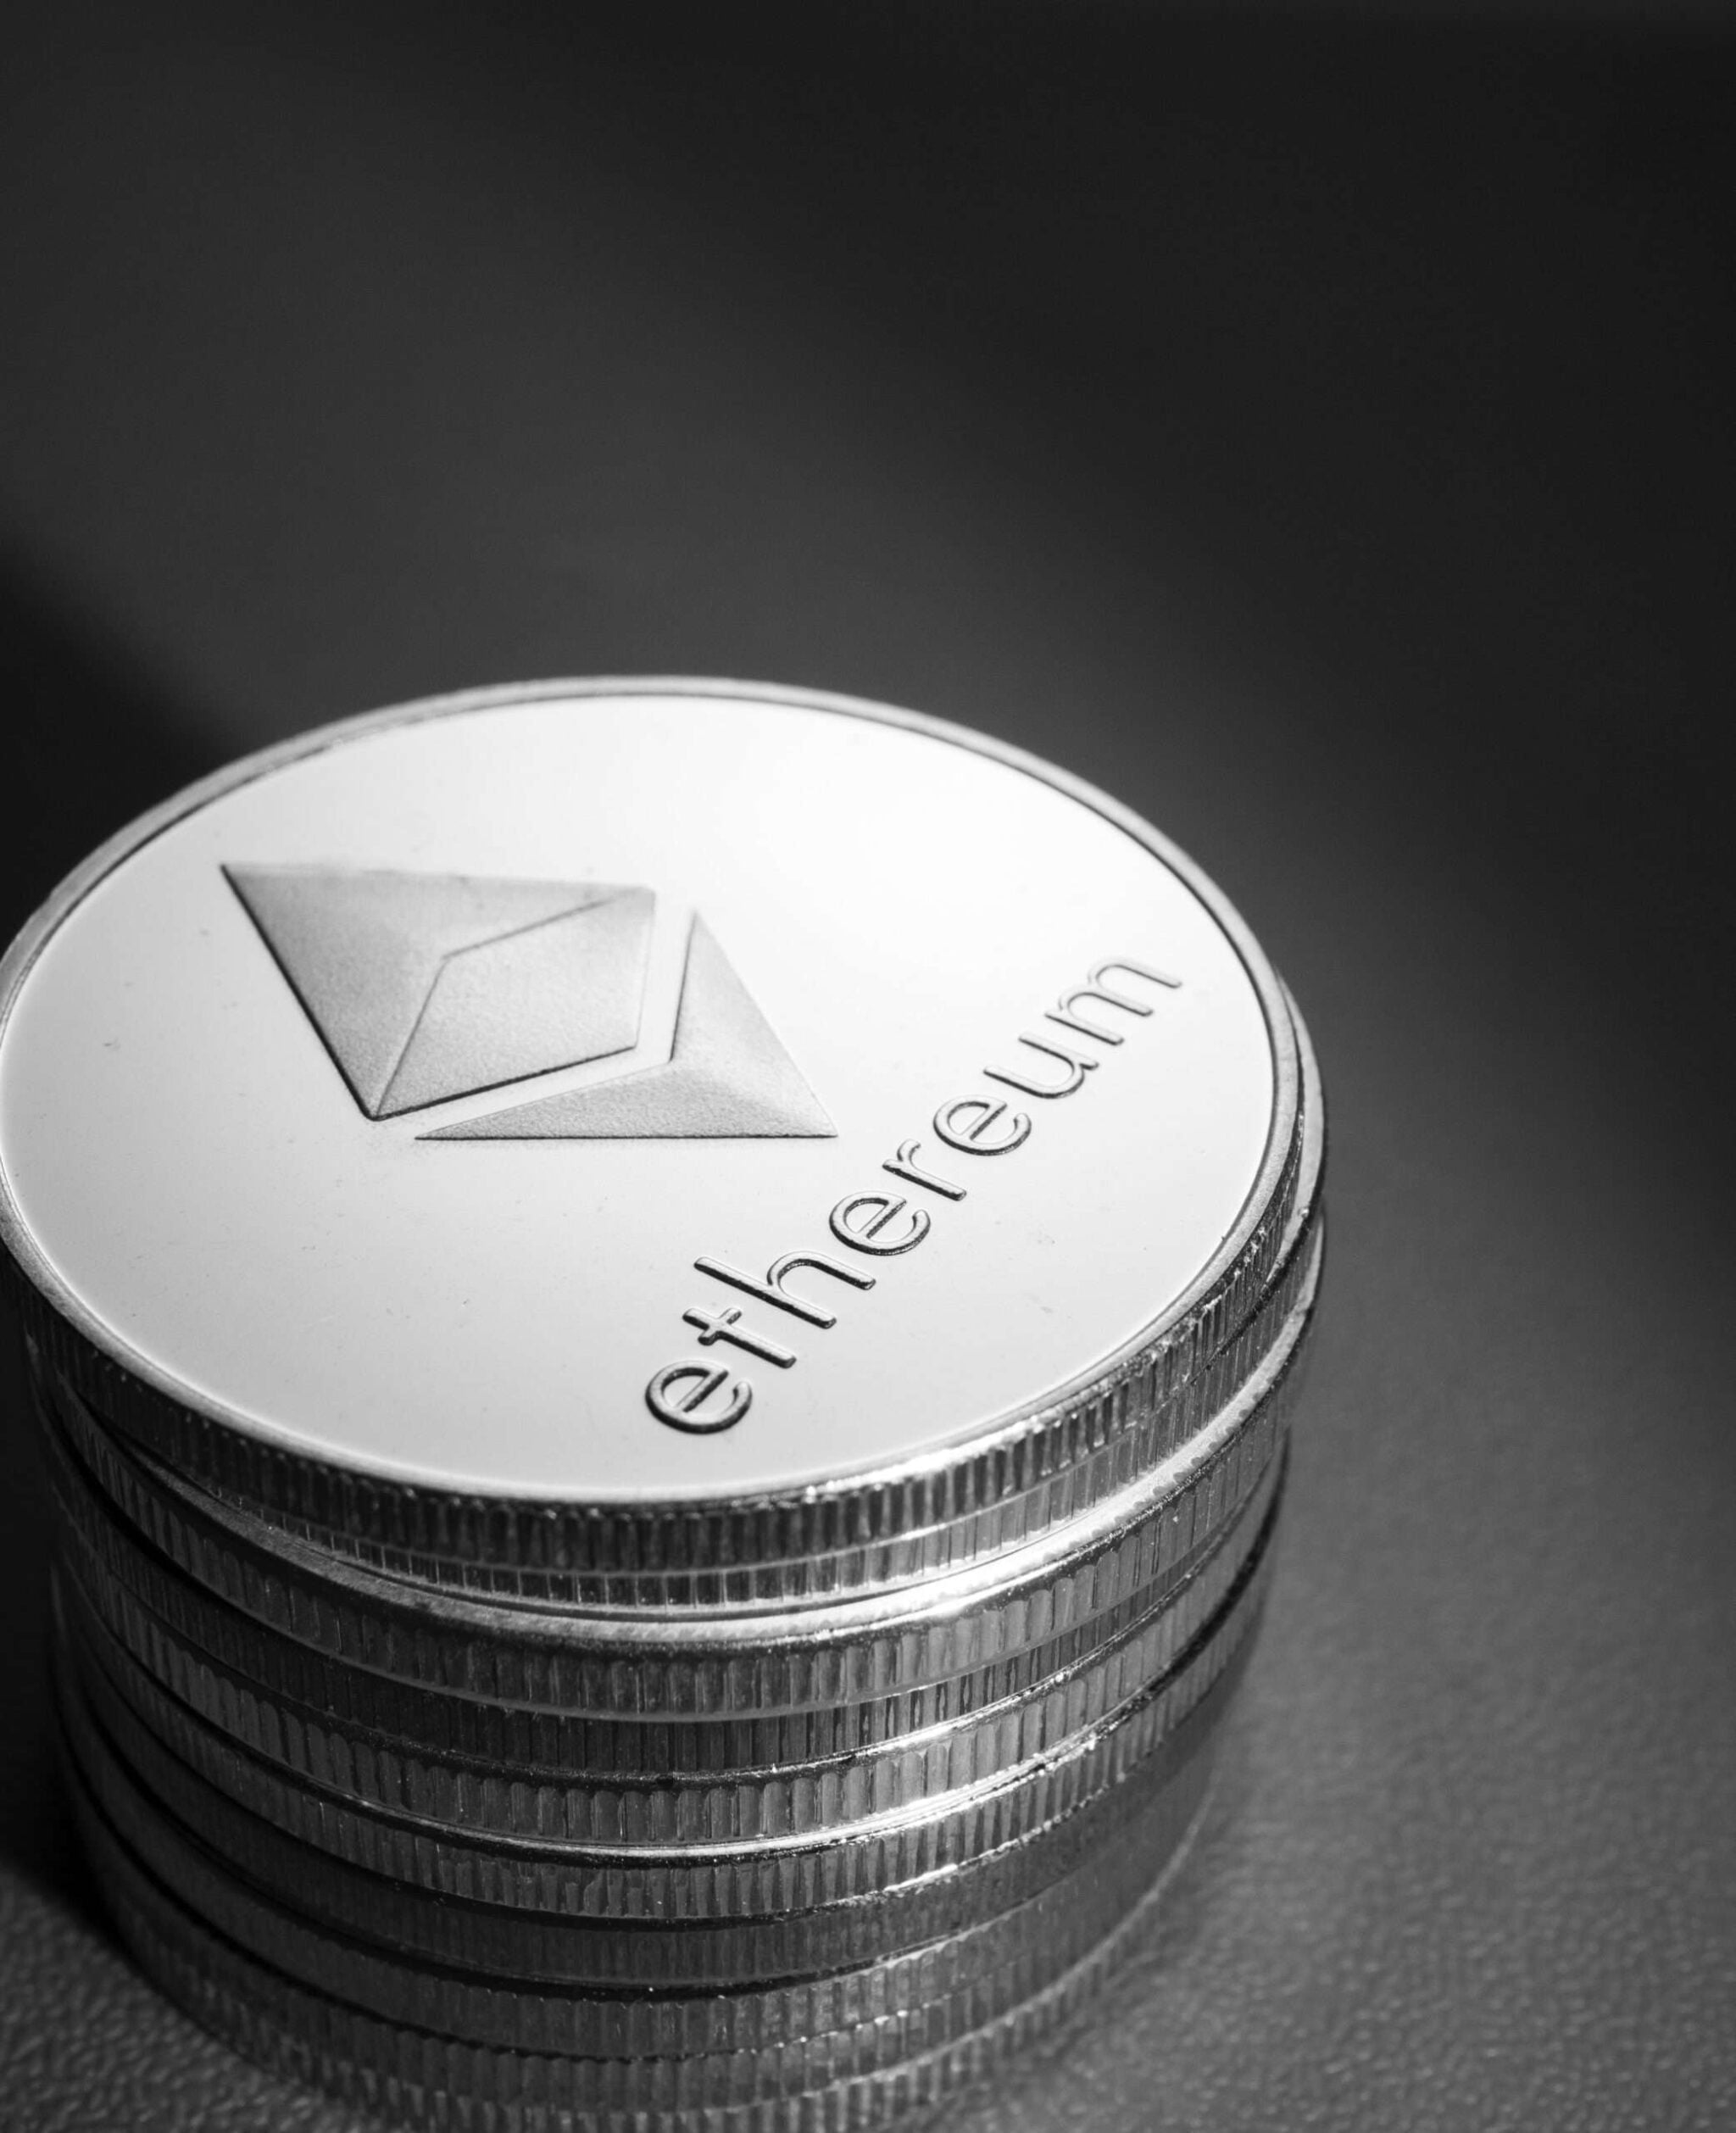 Ethereum coin stack to represent long-dormant Ethereum ICO wallet